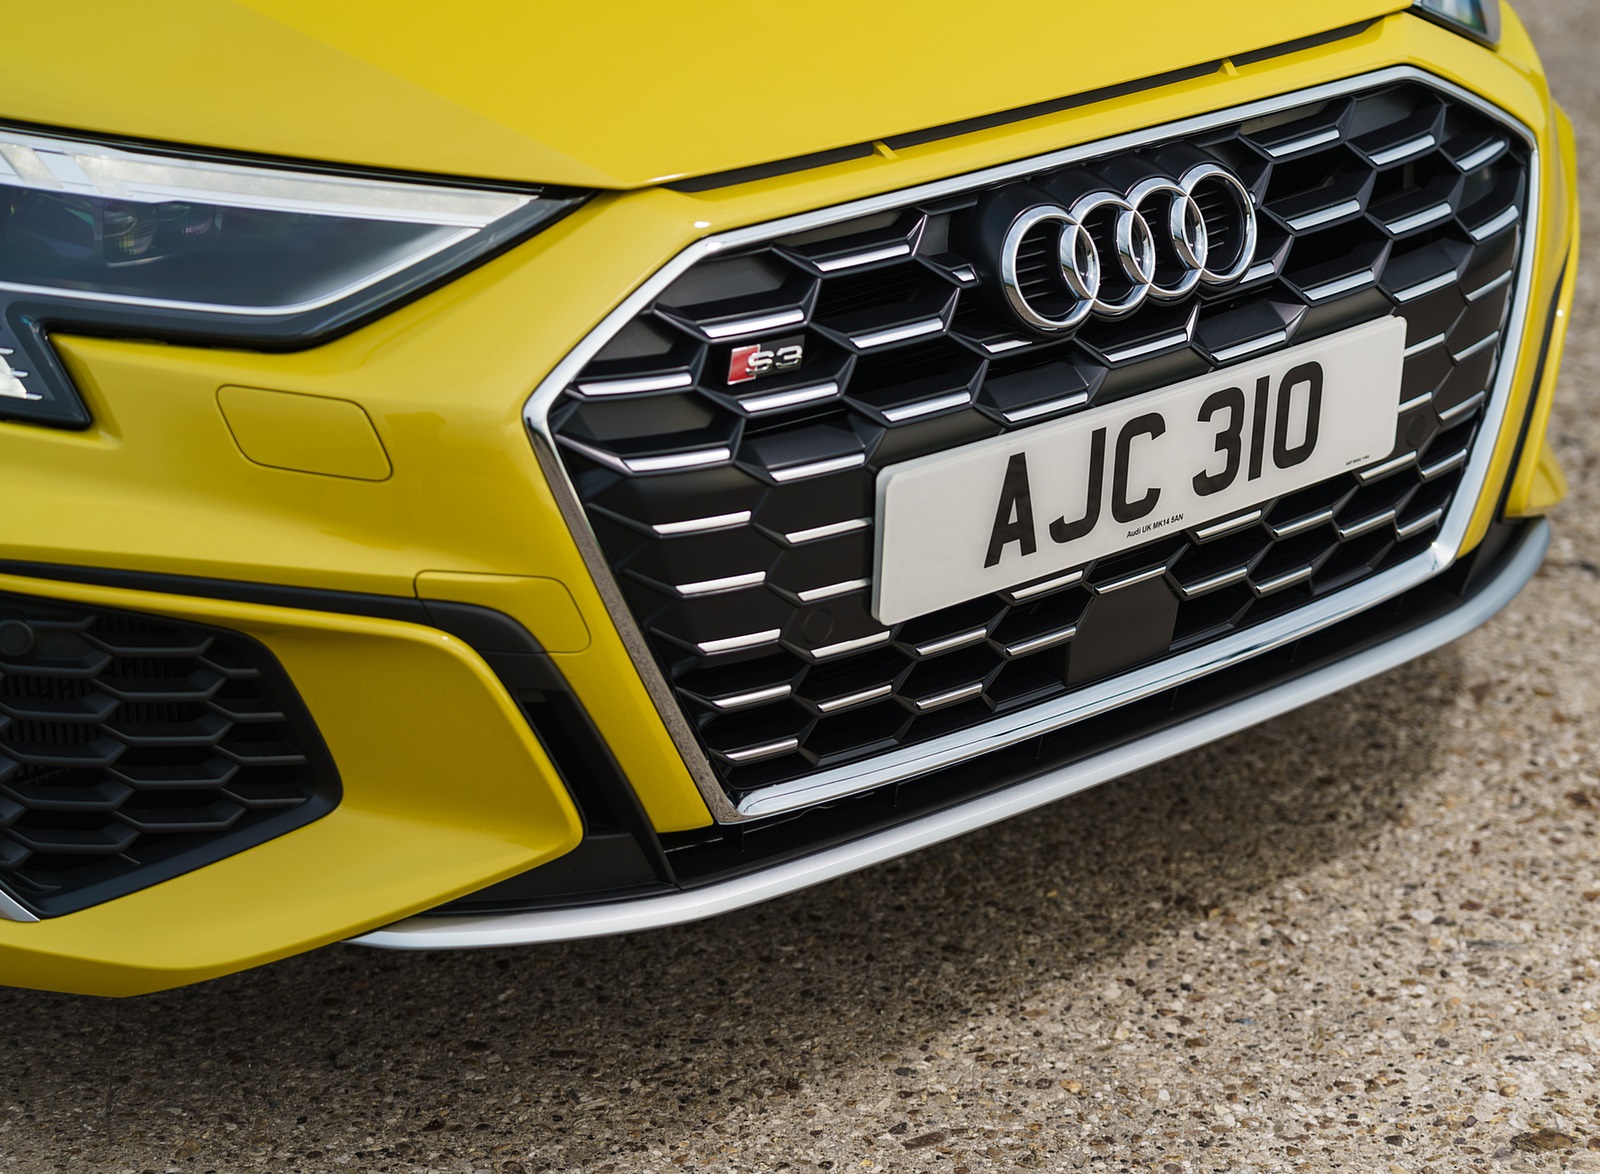 2021 Audi S3 Sportback (UK-Spec) Grill Wallpapers  #55 of 95